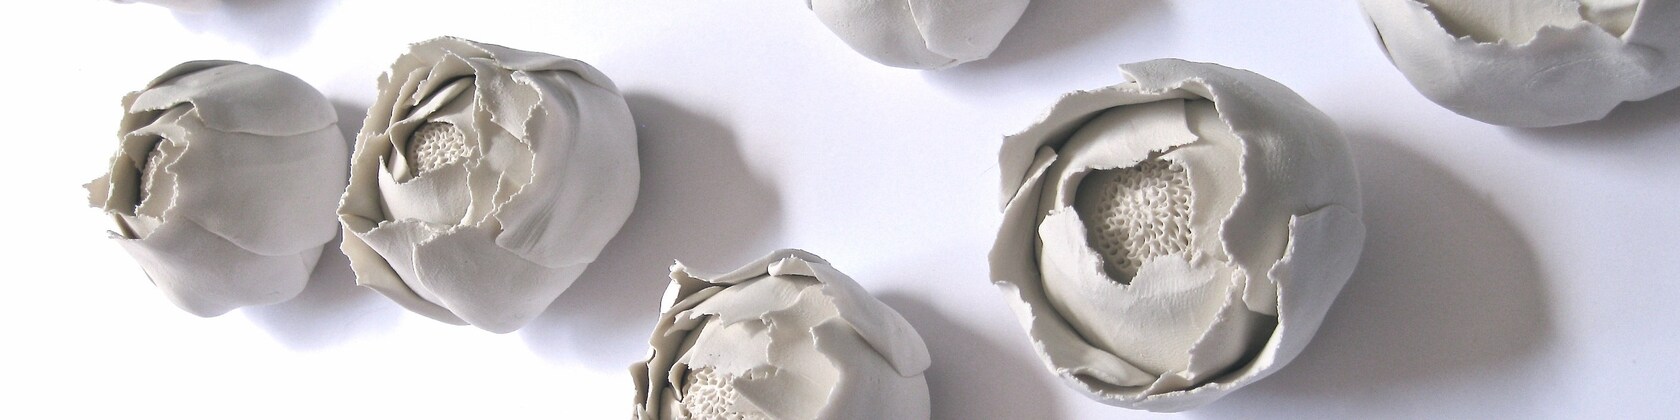 Explosive Voluminous and Intricate Clay Sculptures by DillyPad